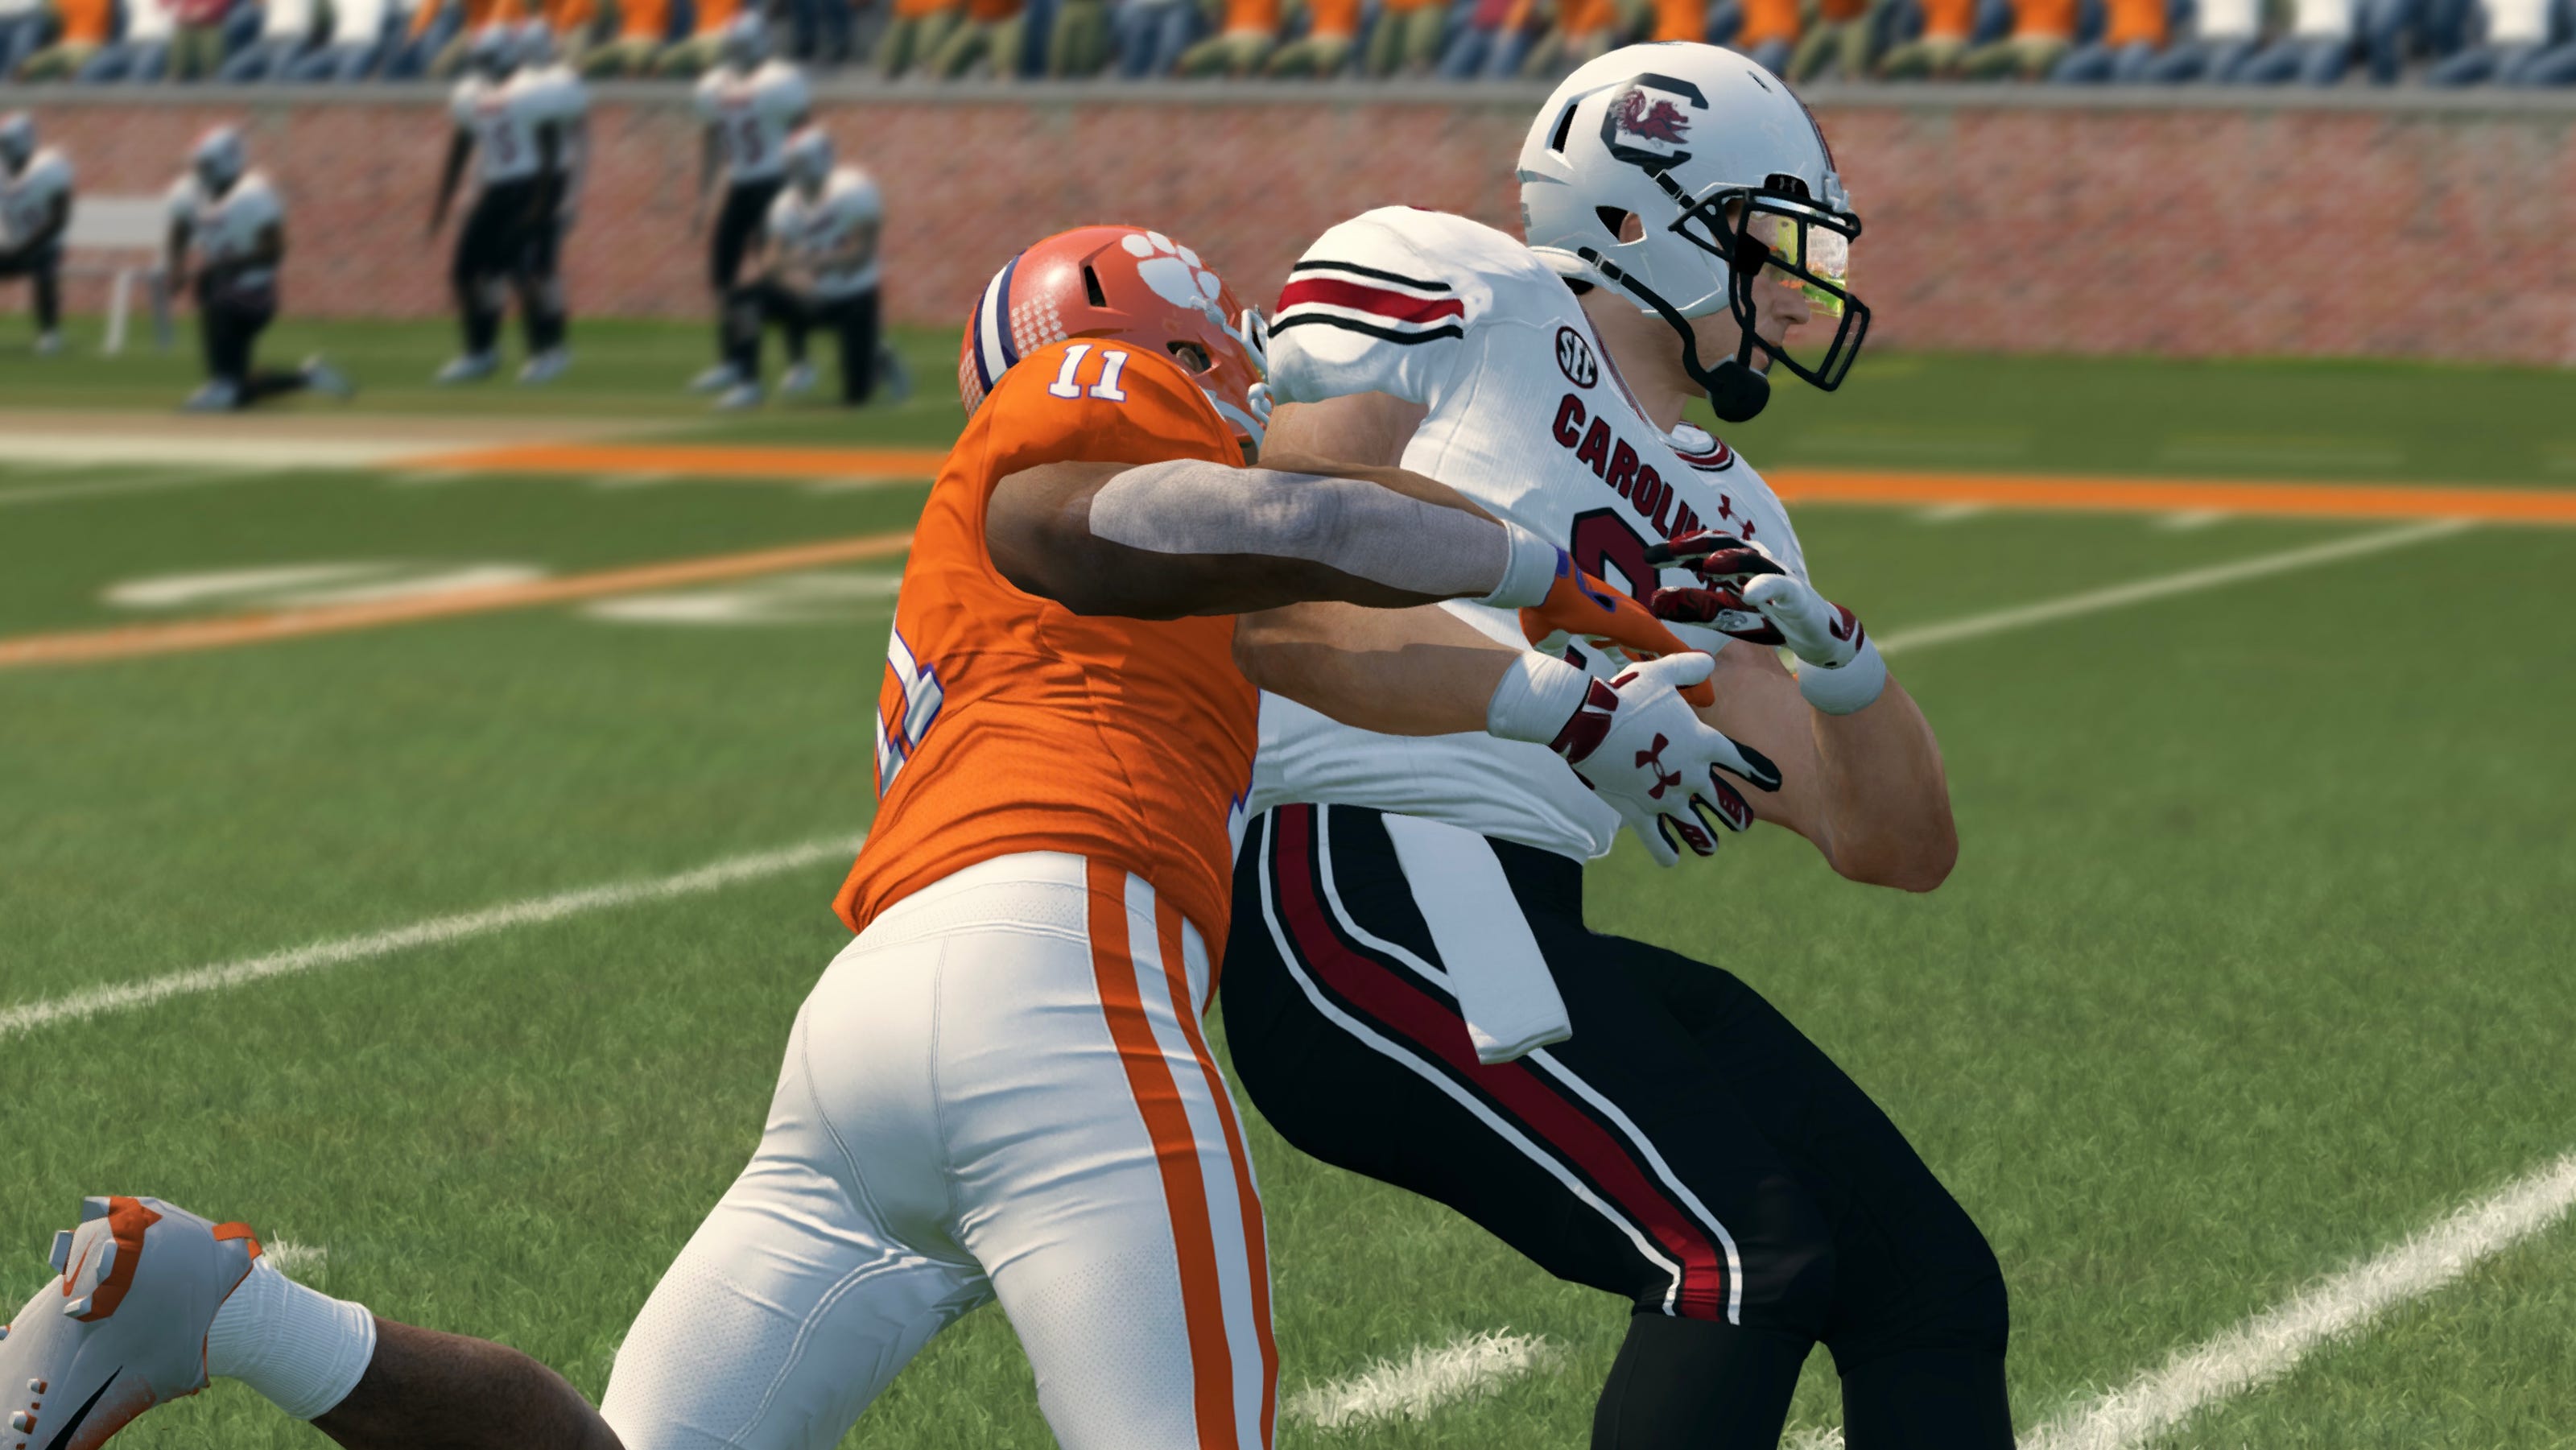 NCAA Football 14 EA Sports game lives on thanks to hardcore fans